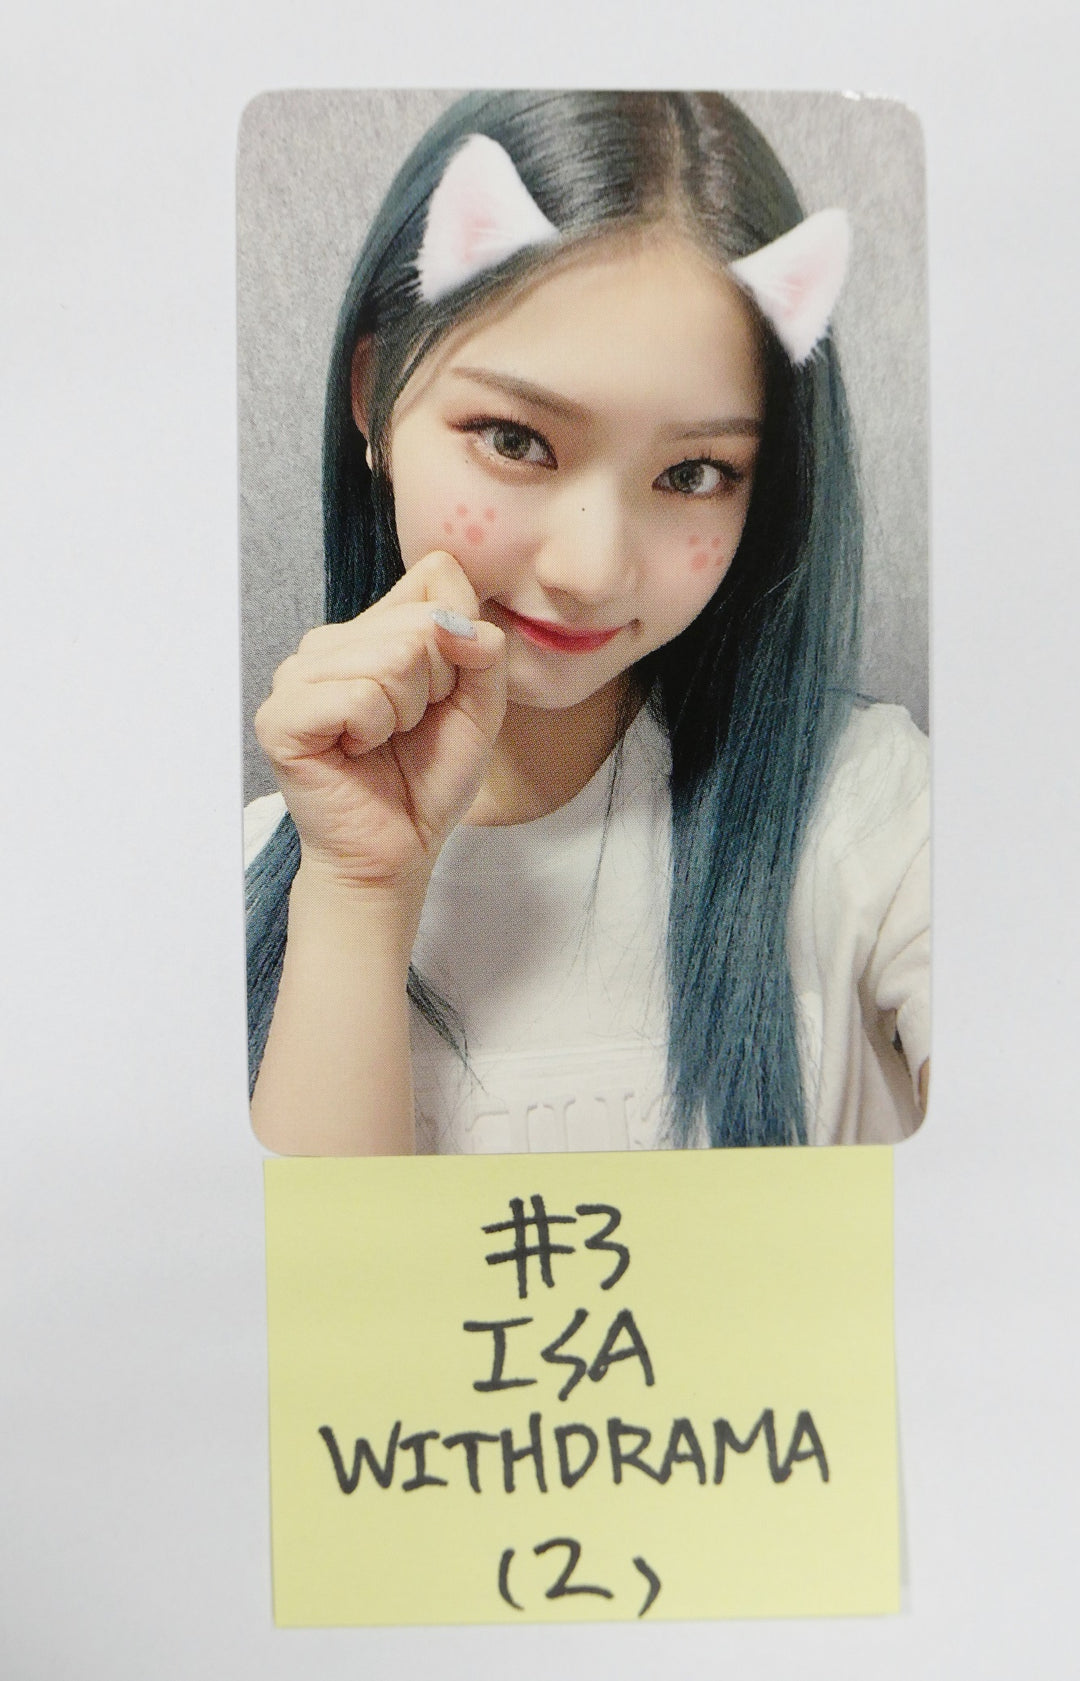 StayC 'STEREOTYPE' - Withdrama Fansign Event Photocard Round 4